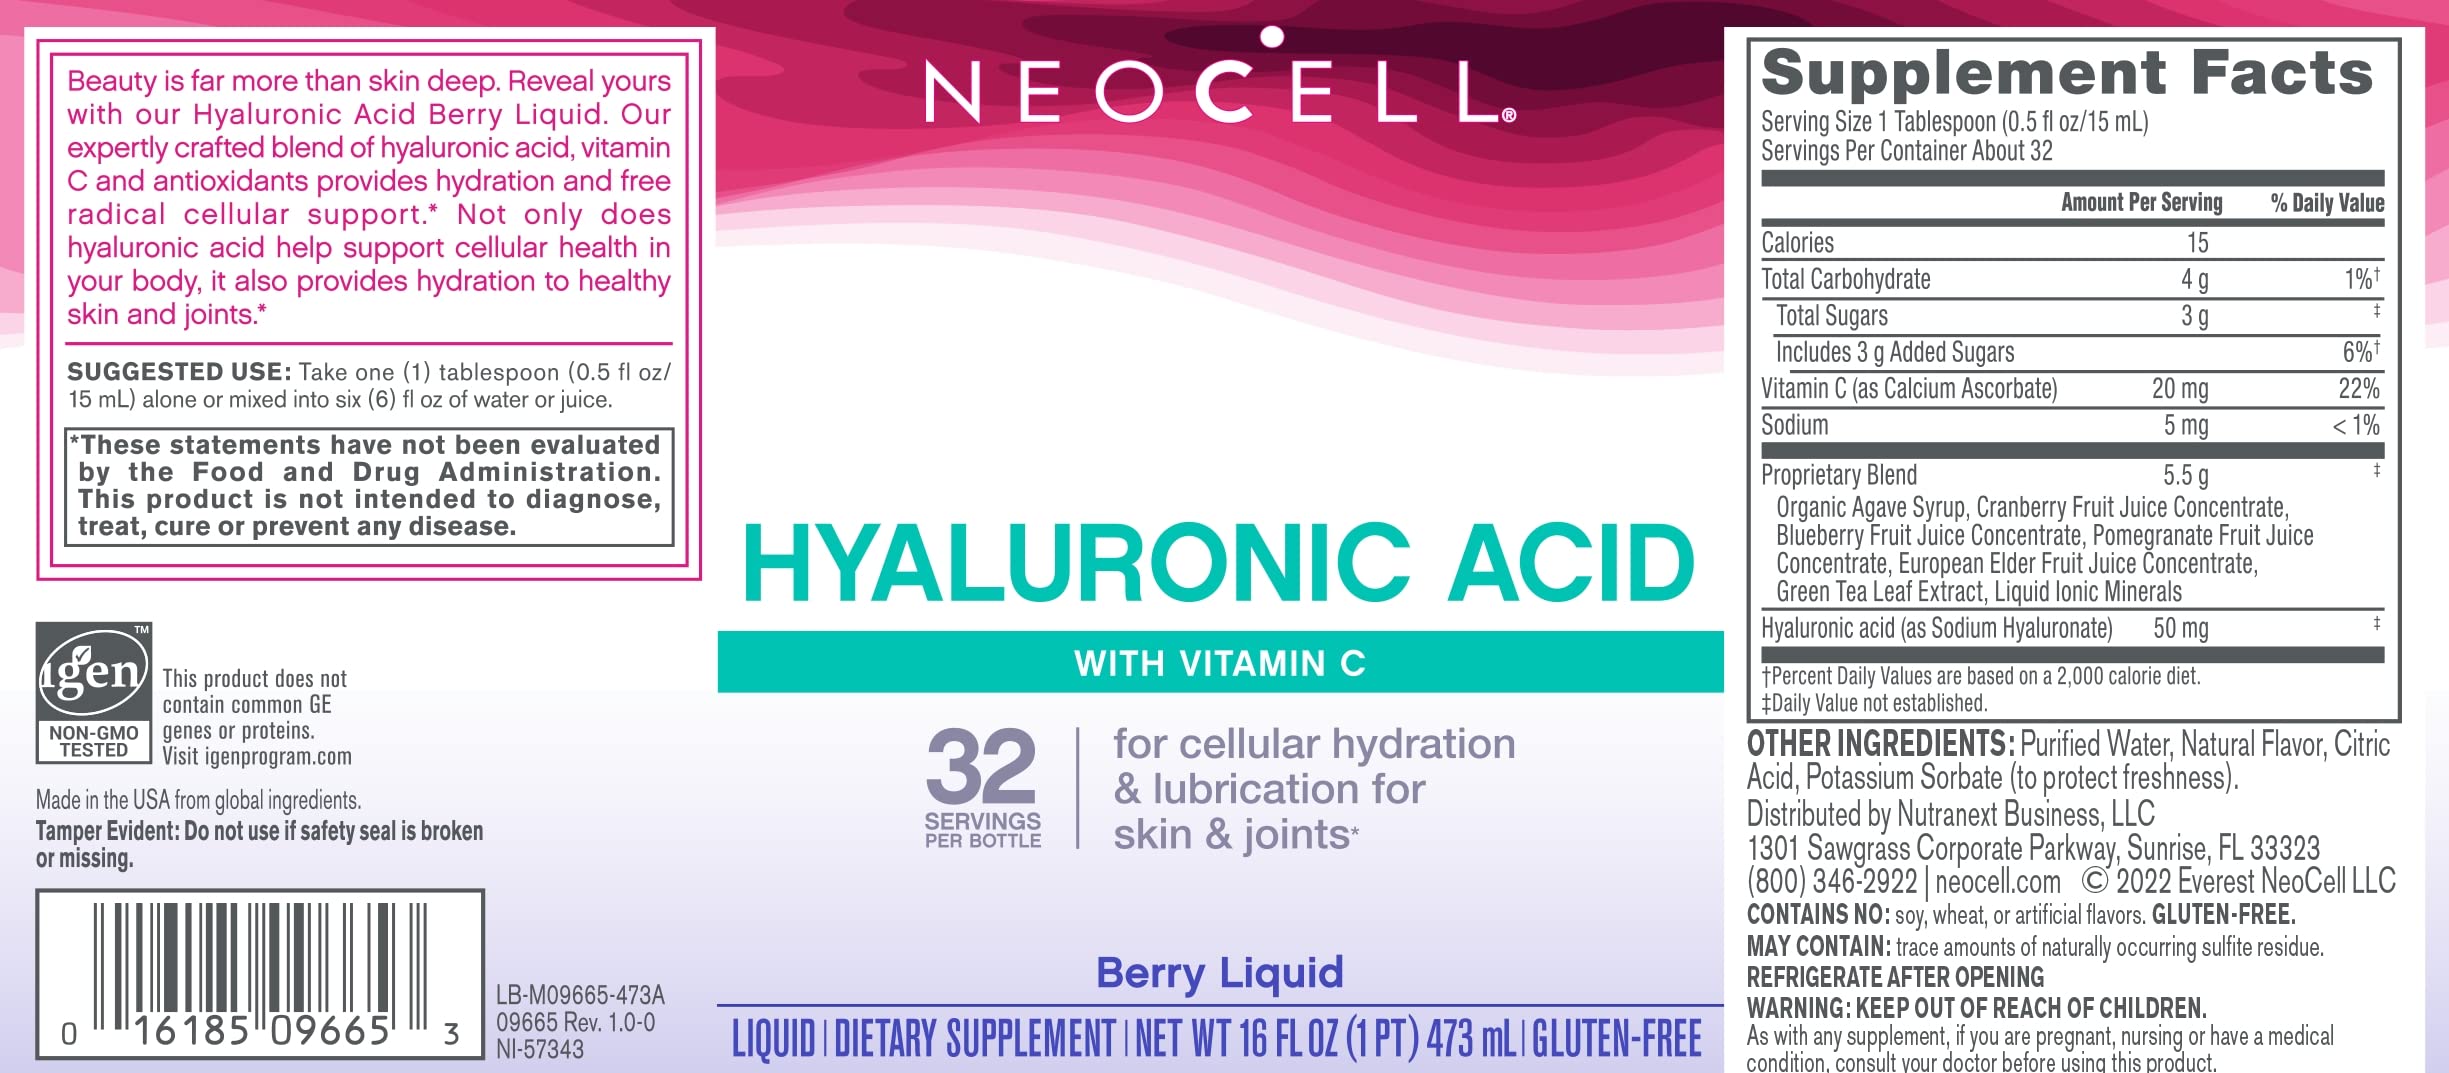 NeoCell Hyaluronic Acid Liquid with Vitamin C, Fights Collagen Depletion, Supports Tissue Hydration, Gluten Free, Berry, 16 Fl. Oz